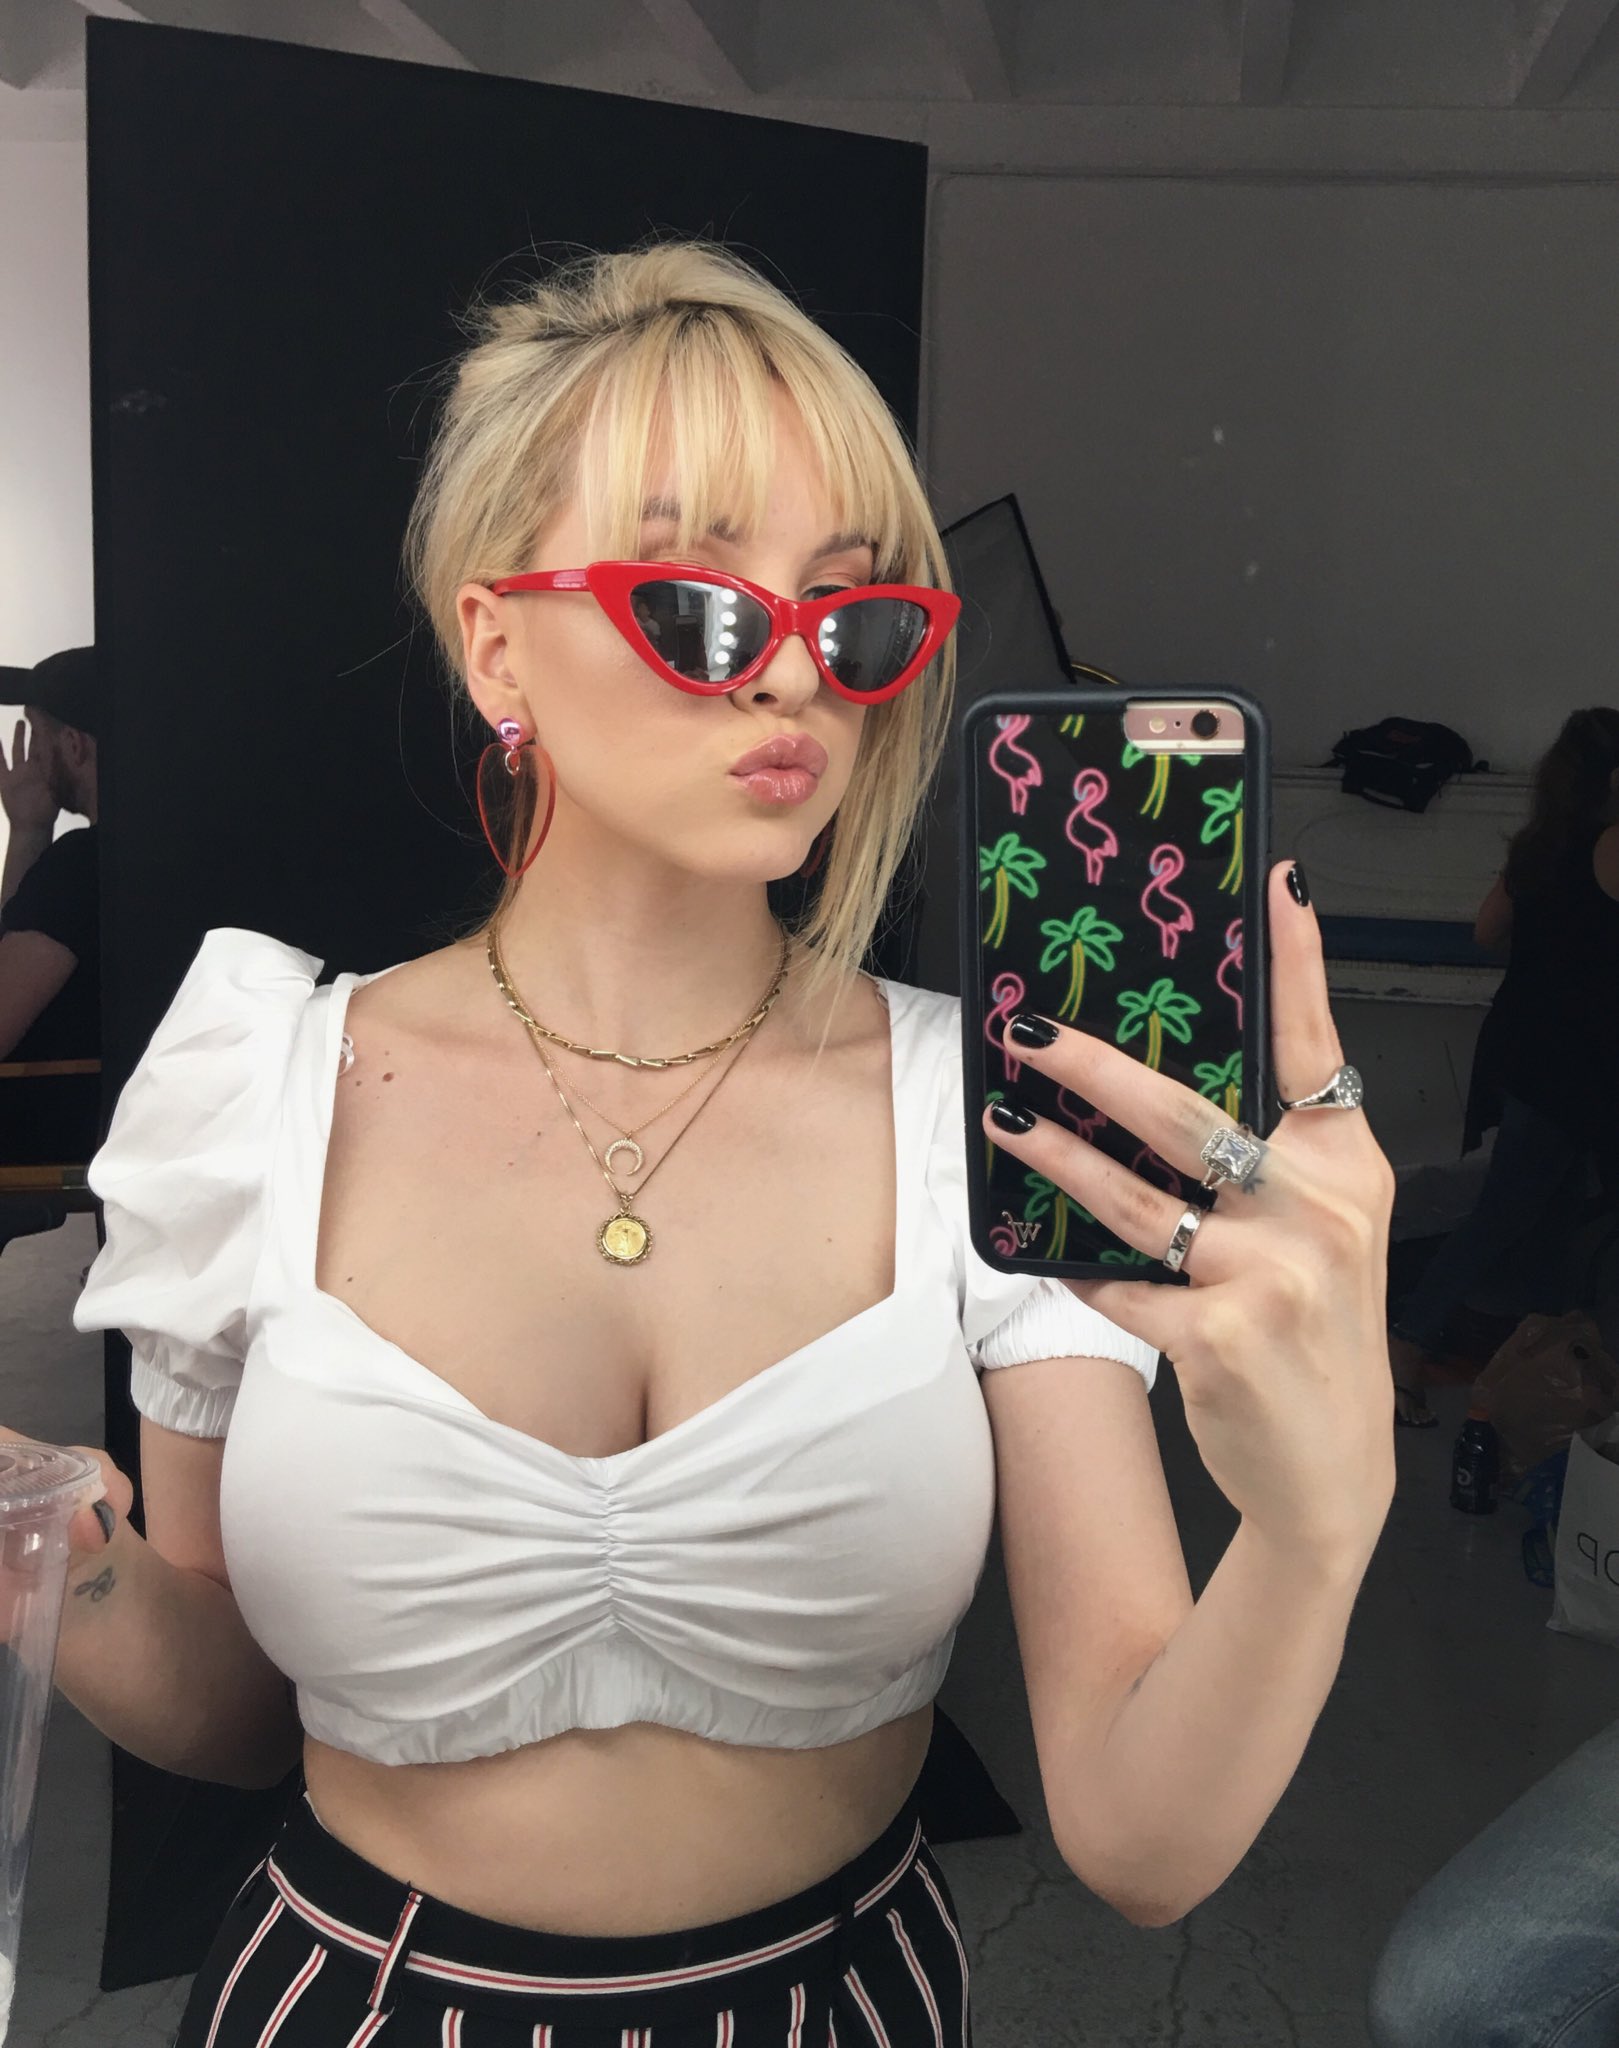 XYLØ on X: that one boob is a lot bigger than the other and